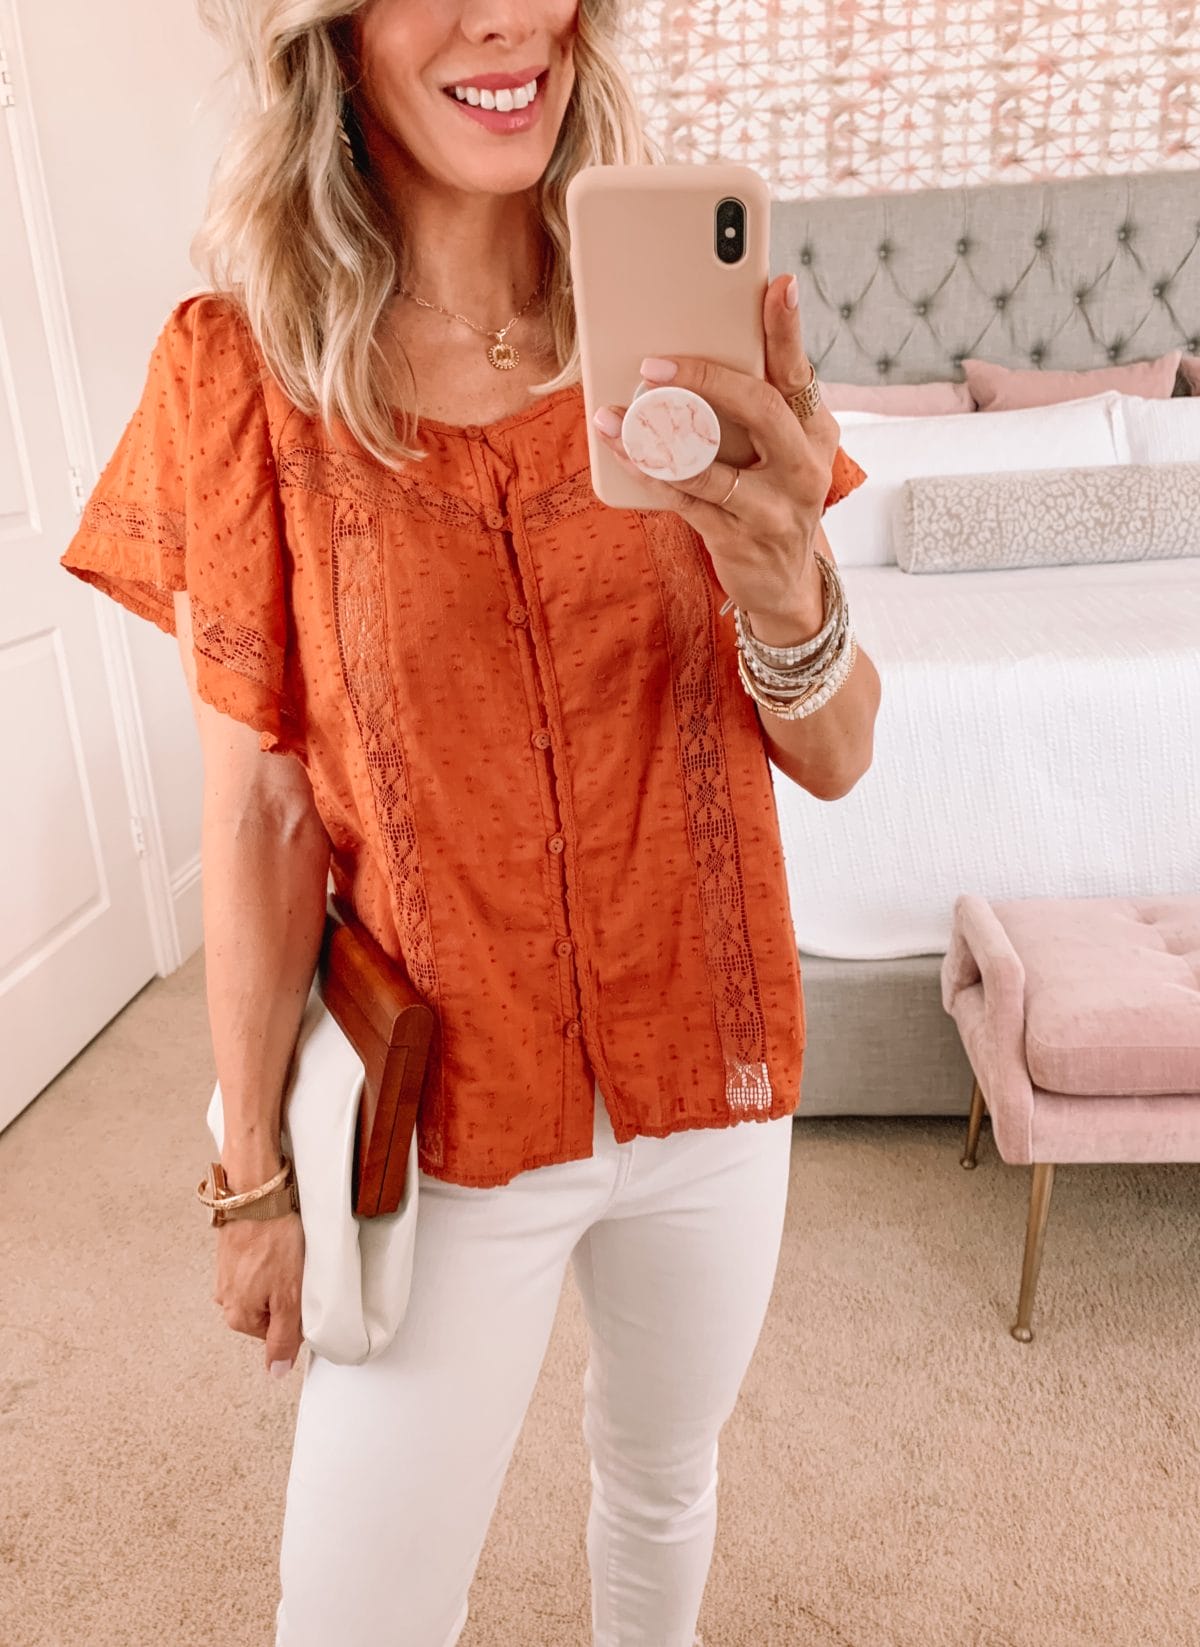 Dressing Room Finds, Rust colored Top and White Jeans with Sandals and Clutch